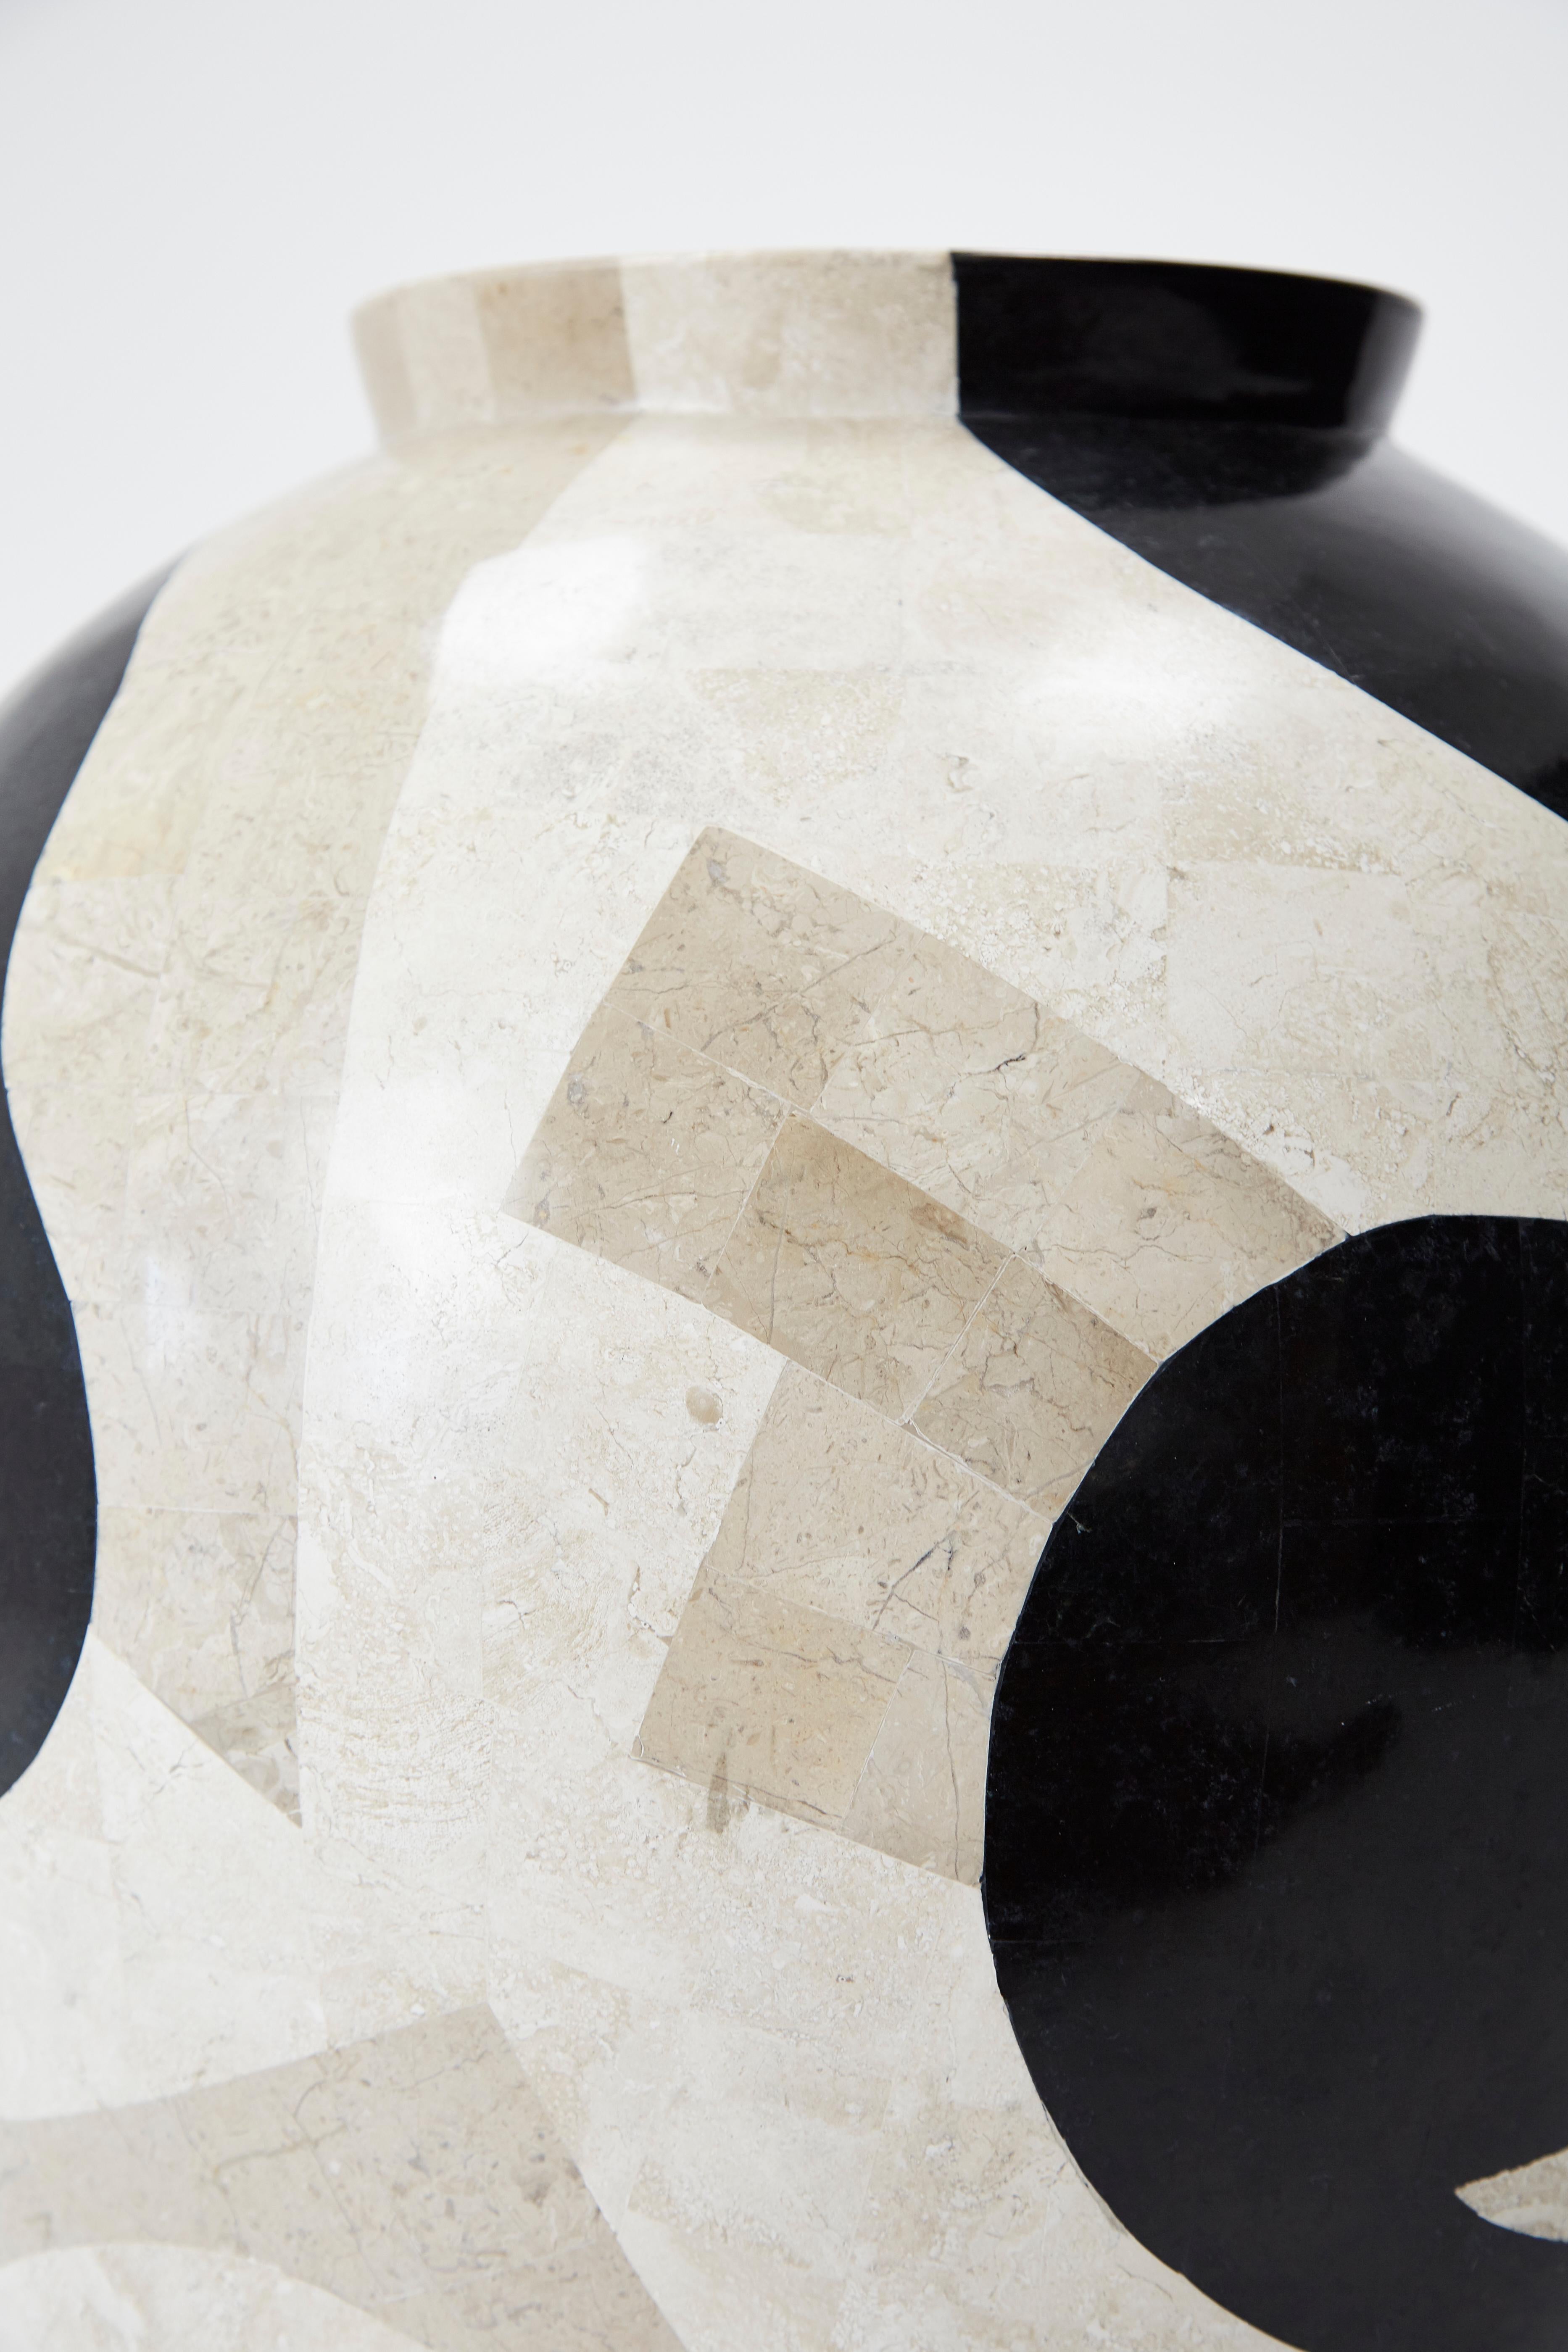 Large Postmodern Tessellated et Cetera Mango Jar Floor Vase, 1990s In Excellent Condition For Sale In Los Angeles, CA